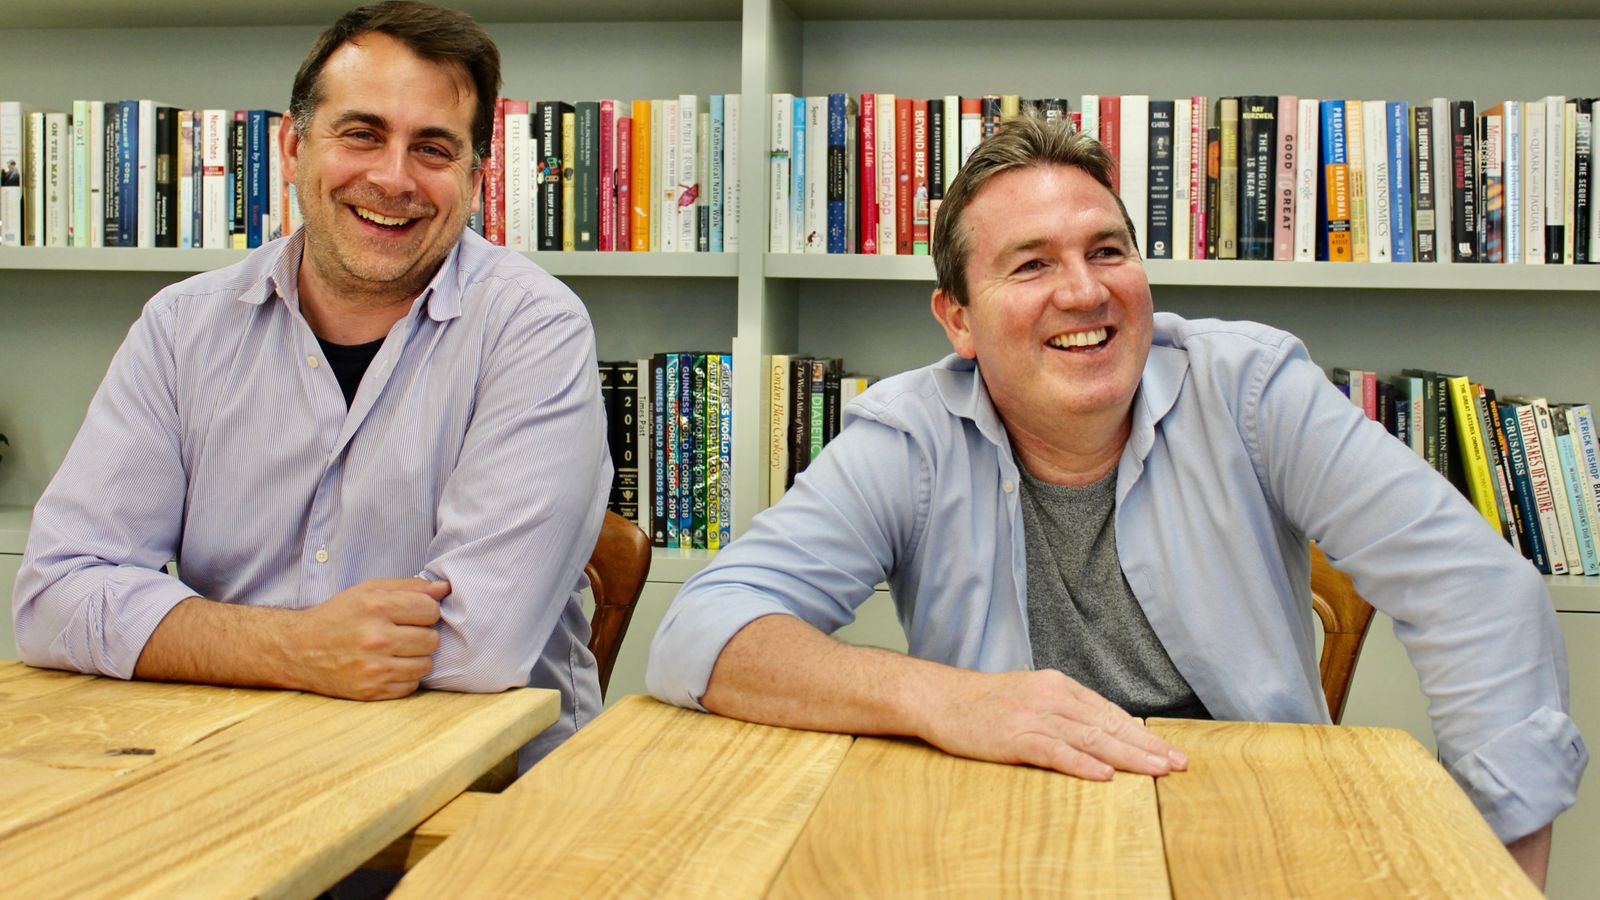 Employee benefits provider Wagestream secures £17m funding boost